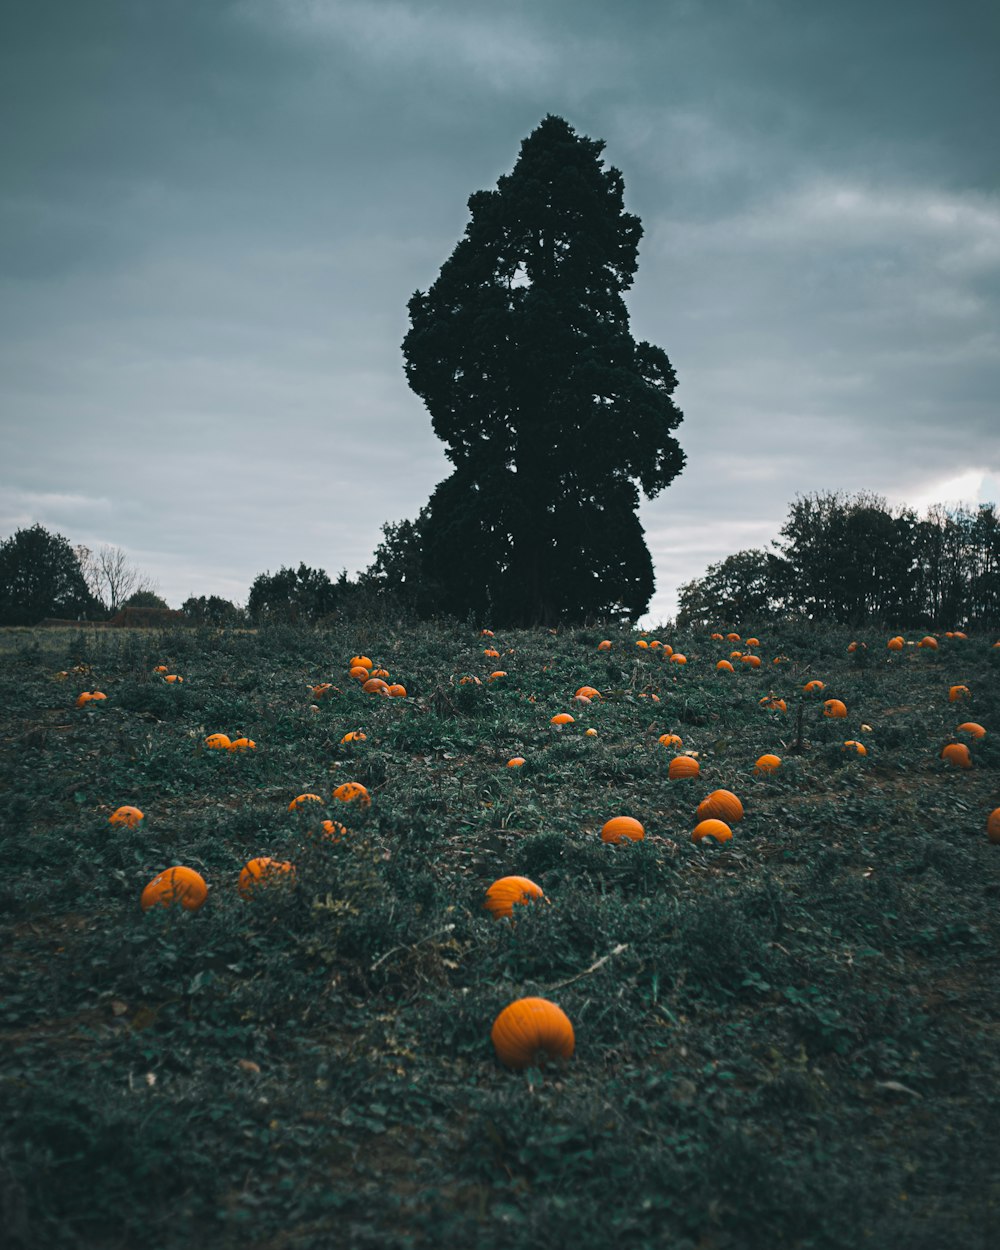 a field full of oranges with a tree in the background